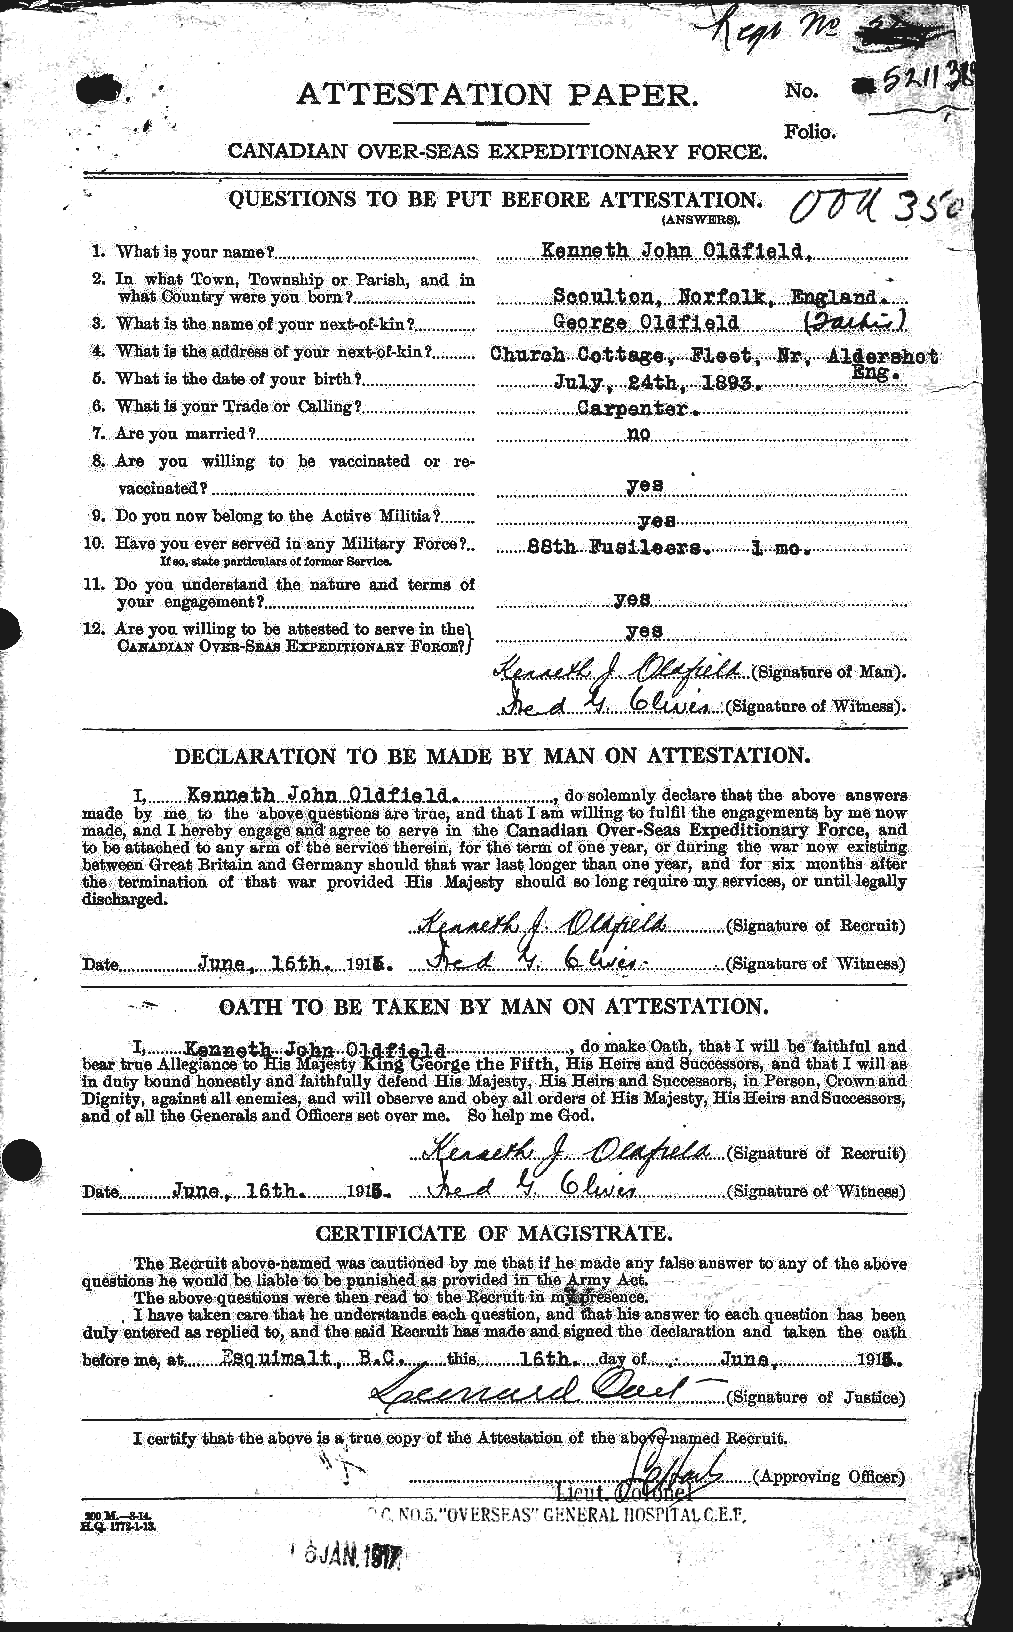 Personnel Records of the First World War - CEF 556958a